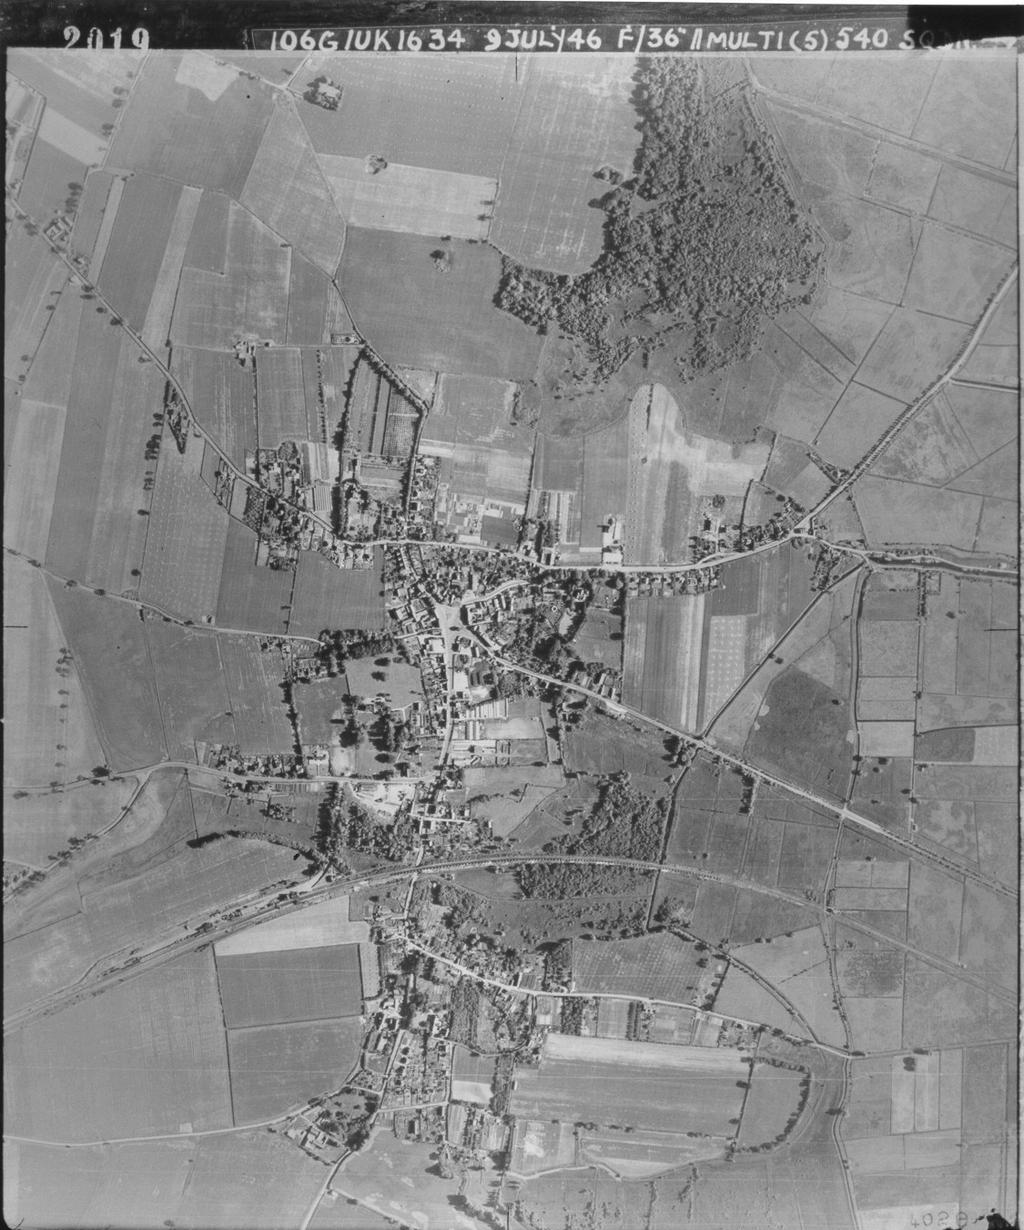 Fig. 5 - Aerial photograph of Acle taken in 1946 showing the compact nature of the town at the time of the Second World War. The Manor House pillbox [see Fig. 1] defended the open central area.